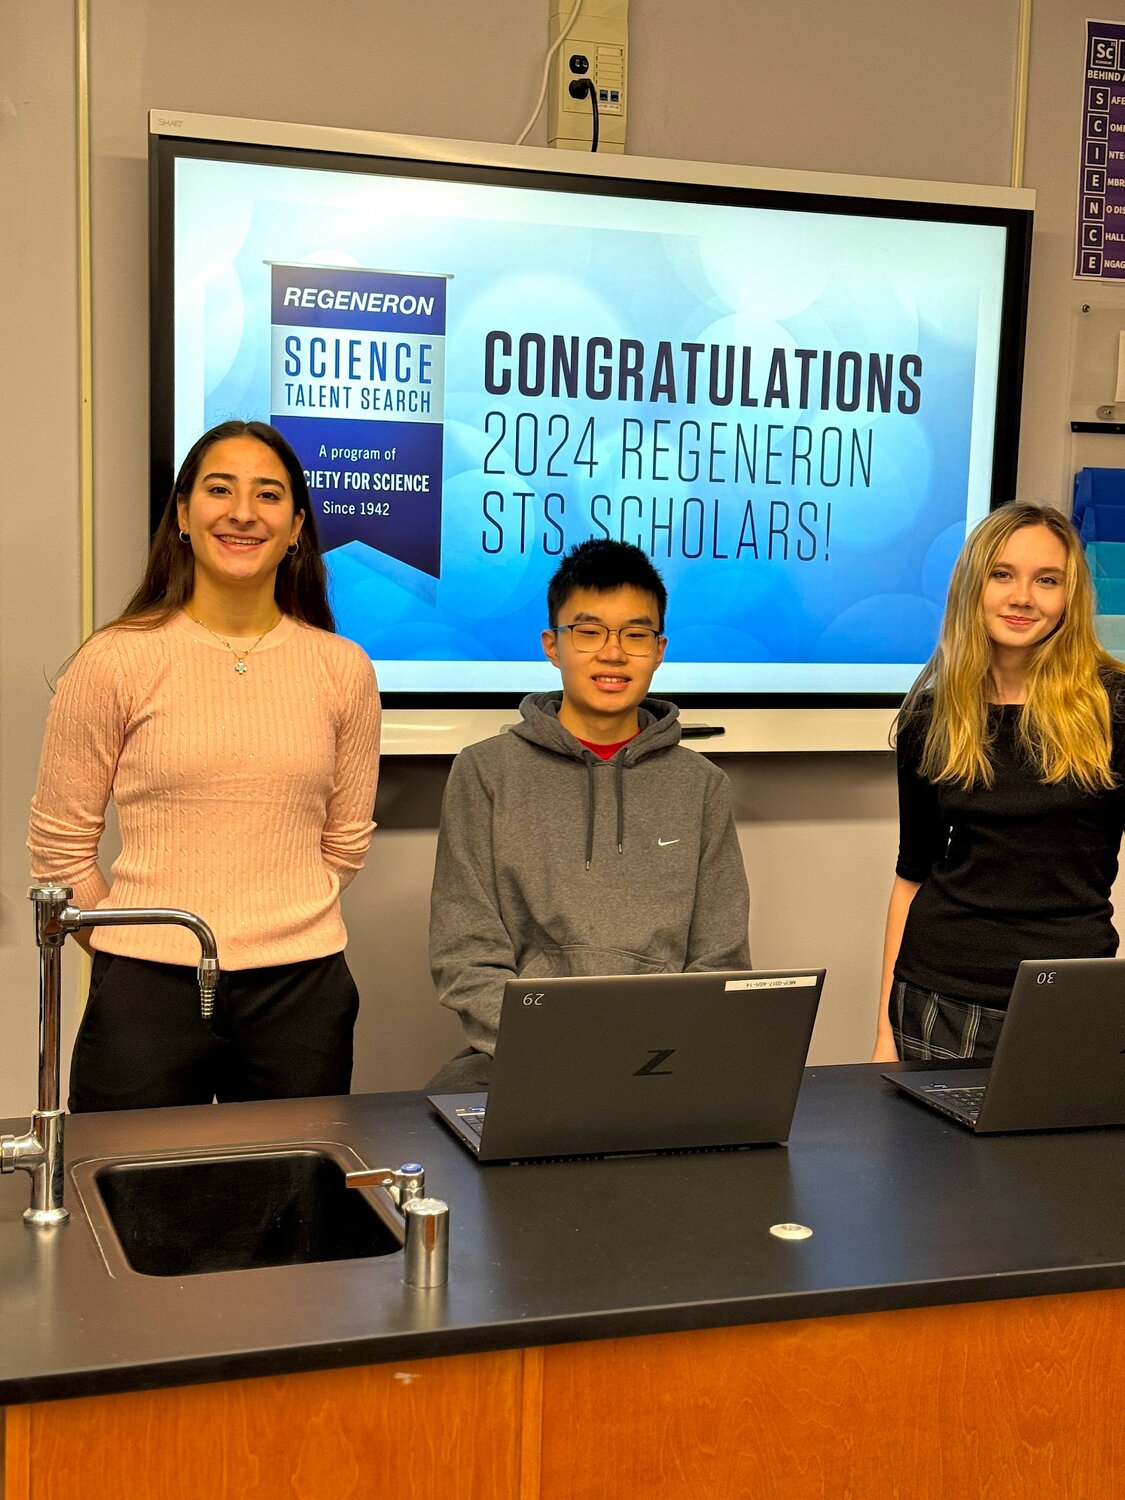 Christina Foufas, Matt Yang and Molly Graff were named semifinalists in the 2024 Society for Science & Public Science Talent Search competition, sponsored by Regeneron.